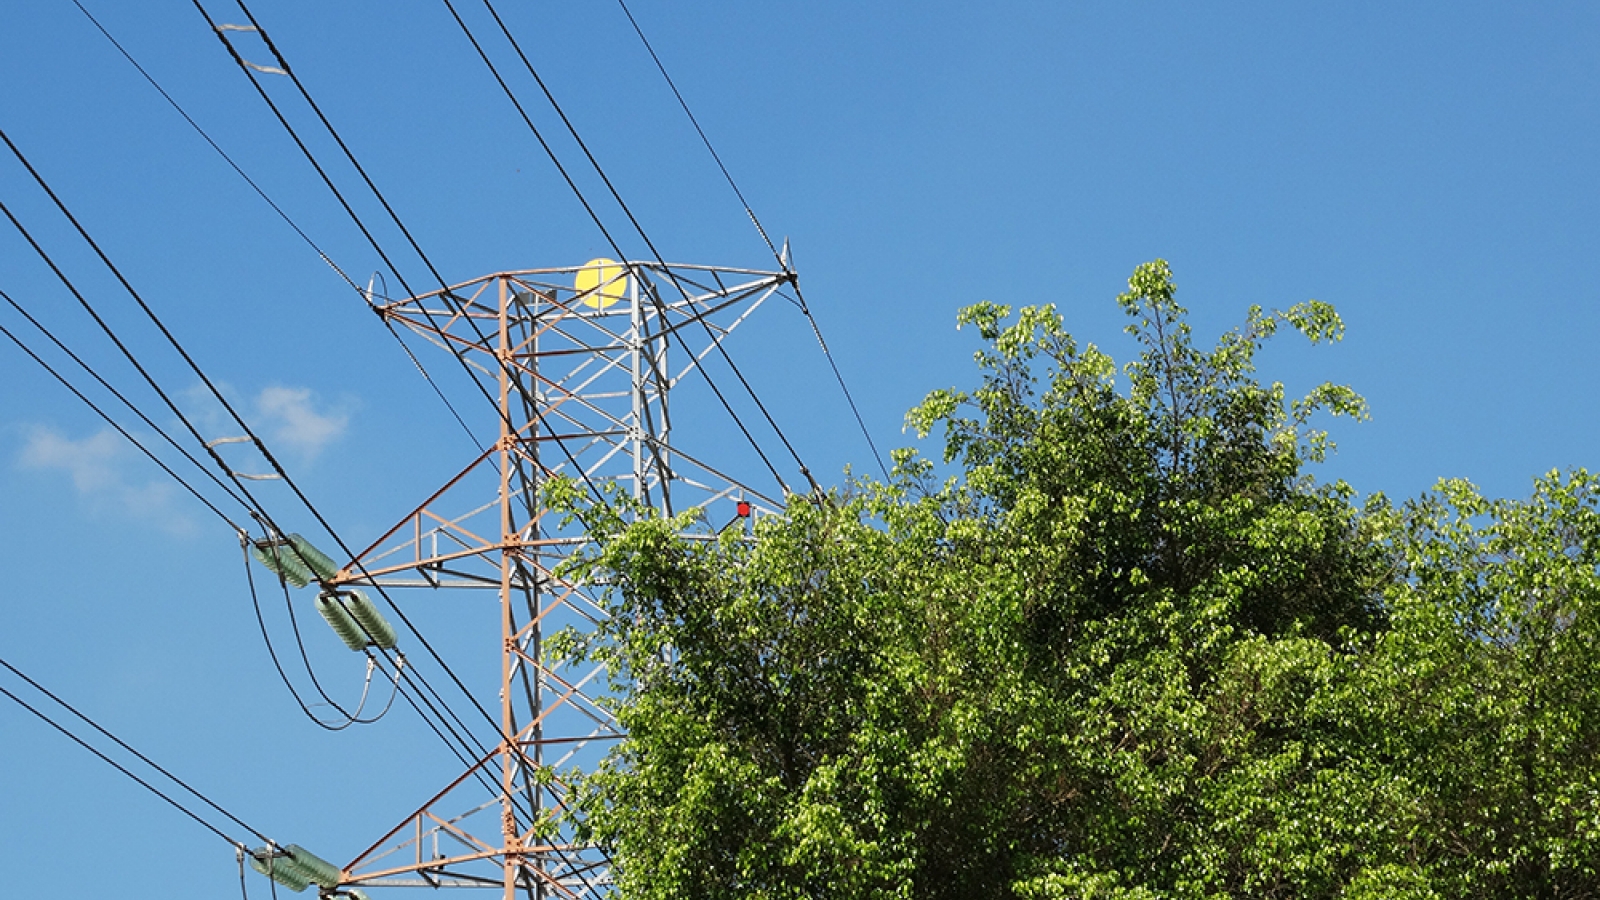 transmission tower with a tree in the foreground